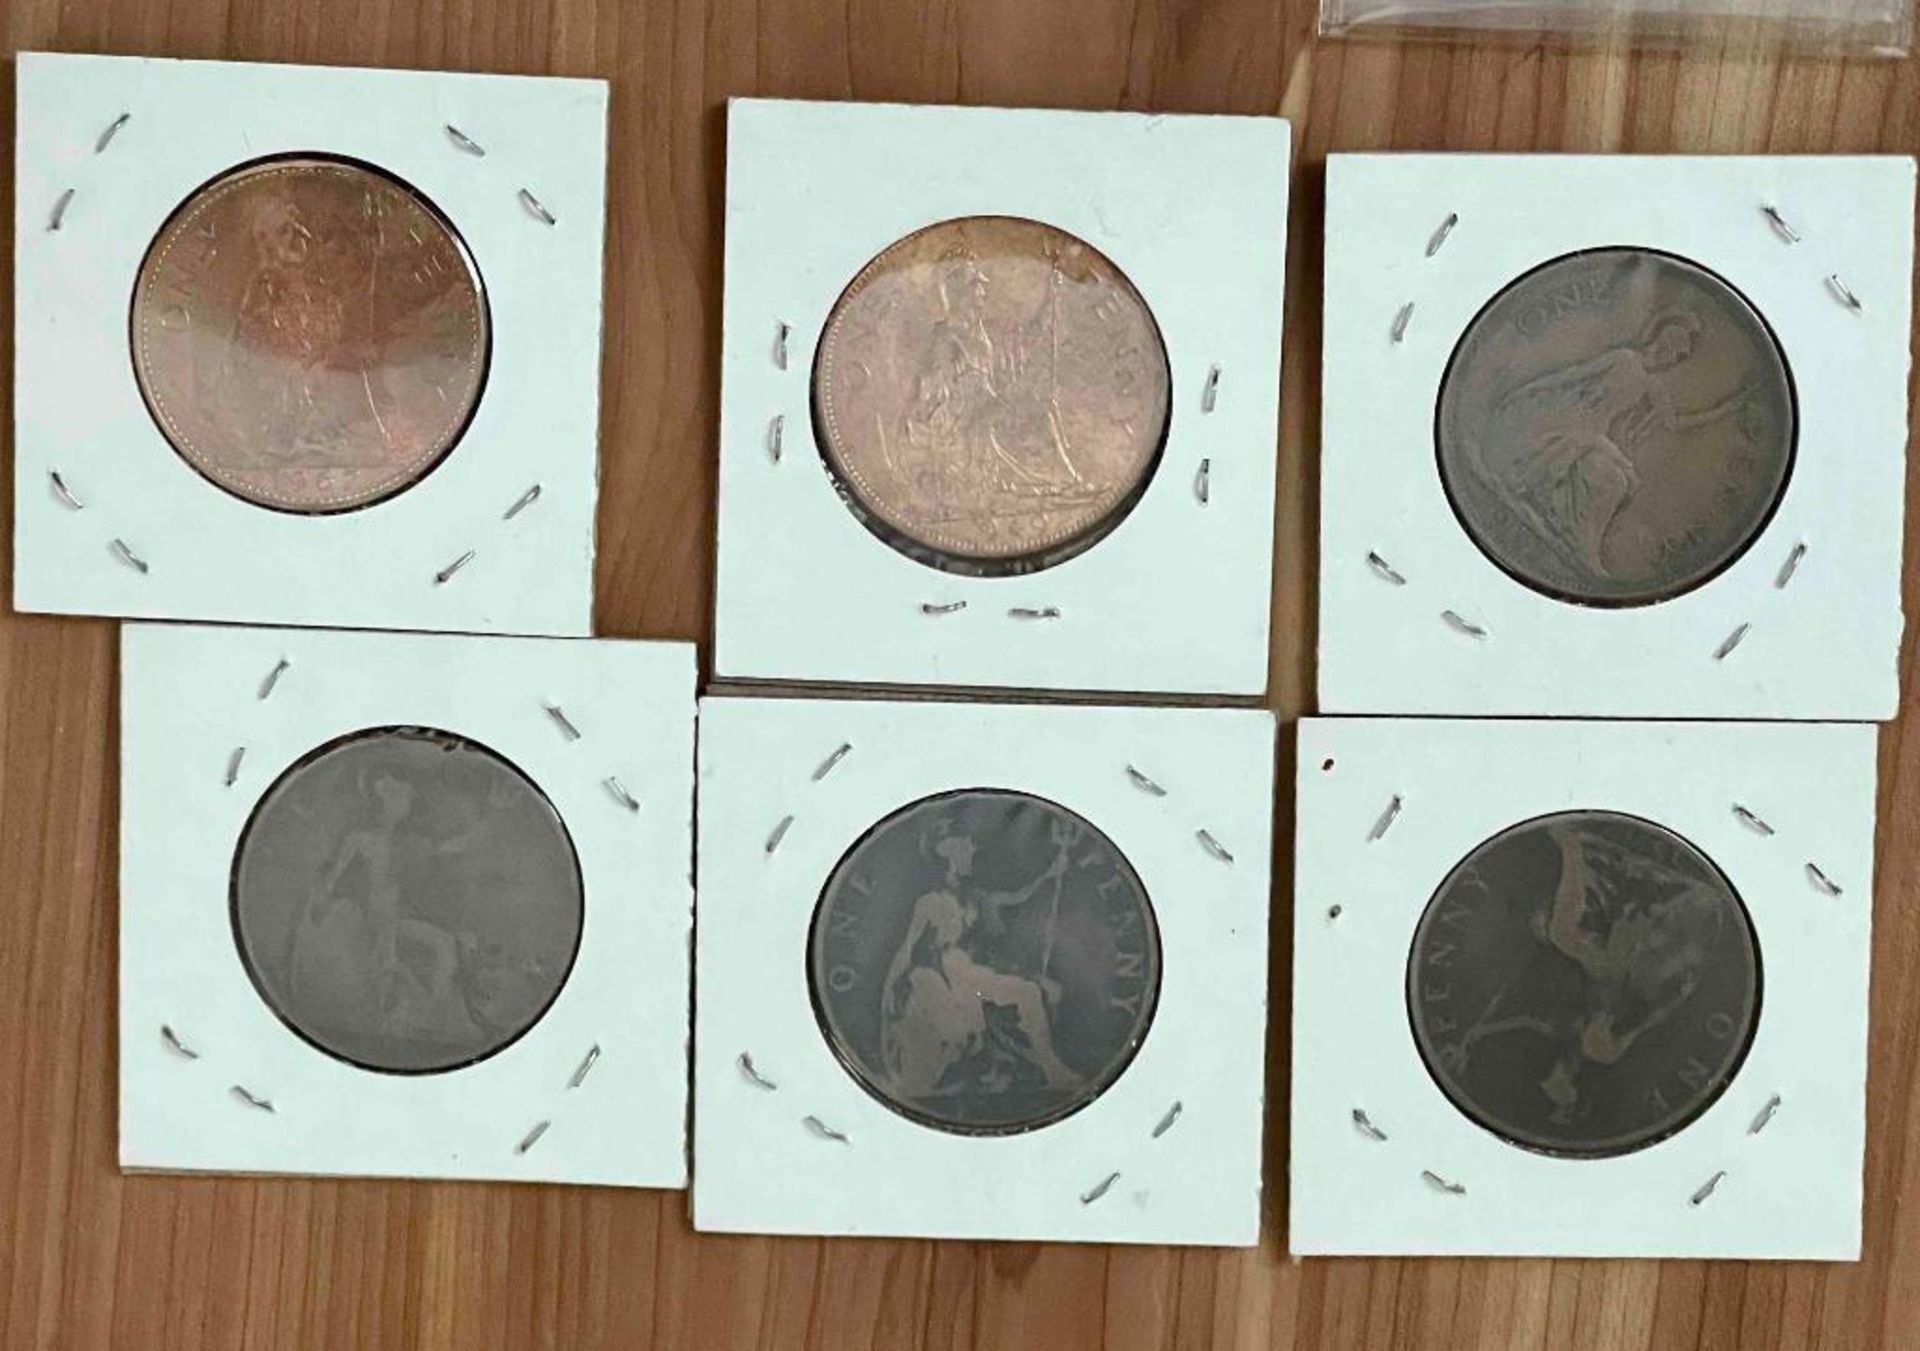 Great Britian George V Pennies 1911-1936 (1918-19 missing 4 coins), 1979 Isle of Man lifeboat, Penny - Image 7 of 13